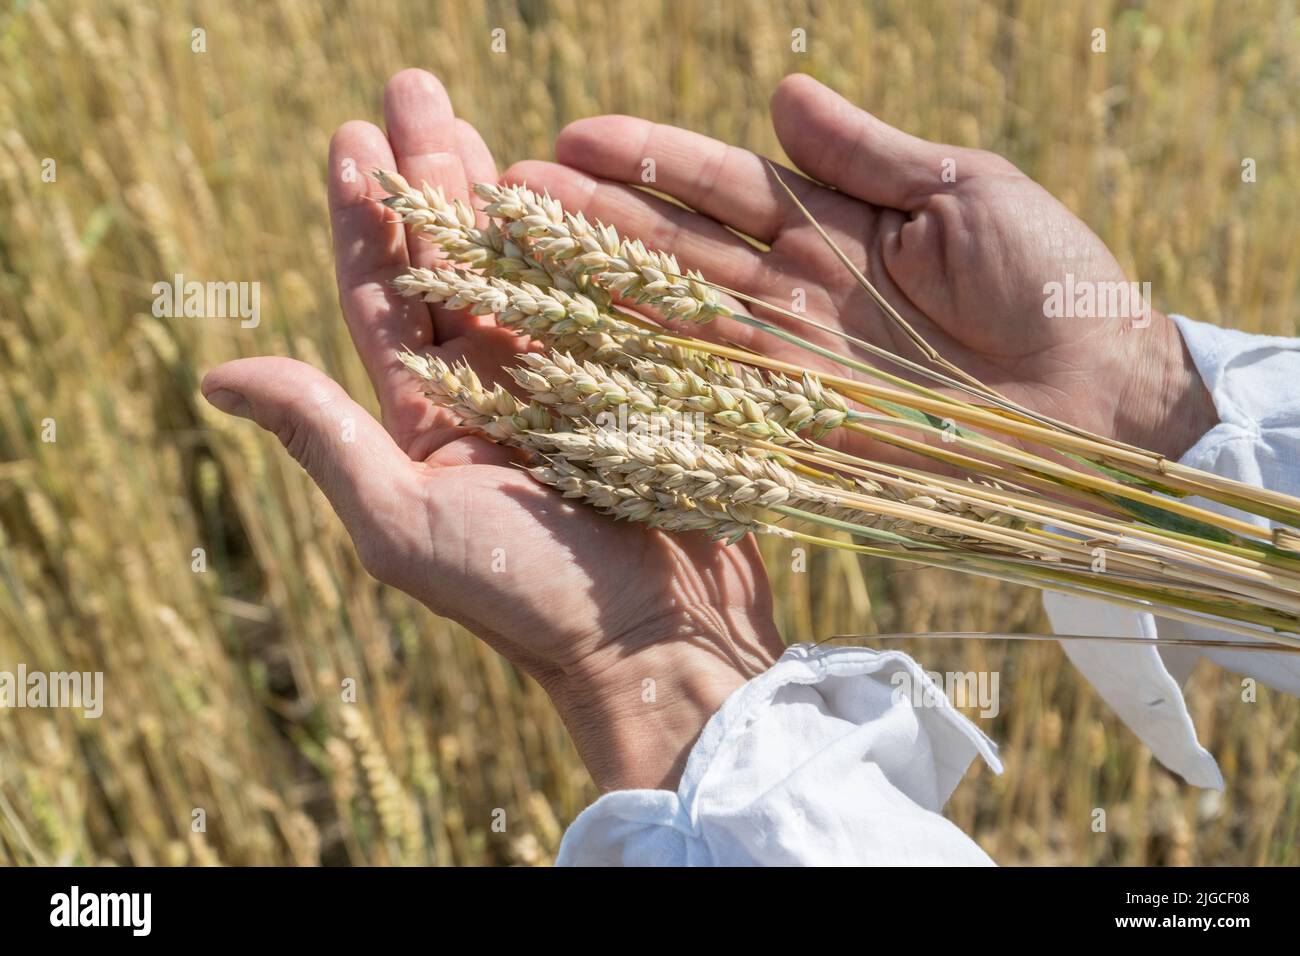 Male hands holding ears of wheat in a wheat field. World food security concept. Stock Photo